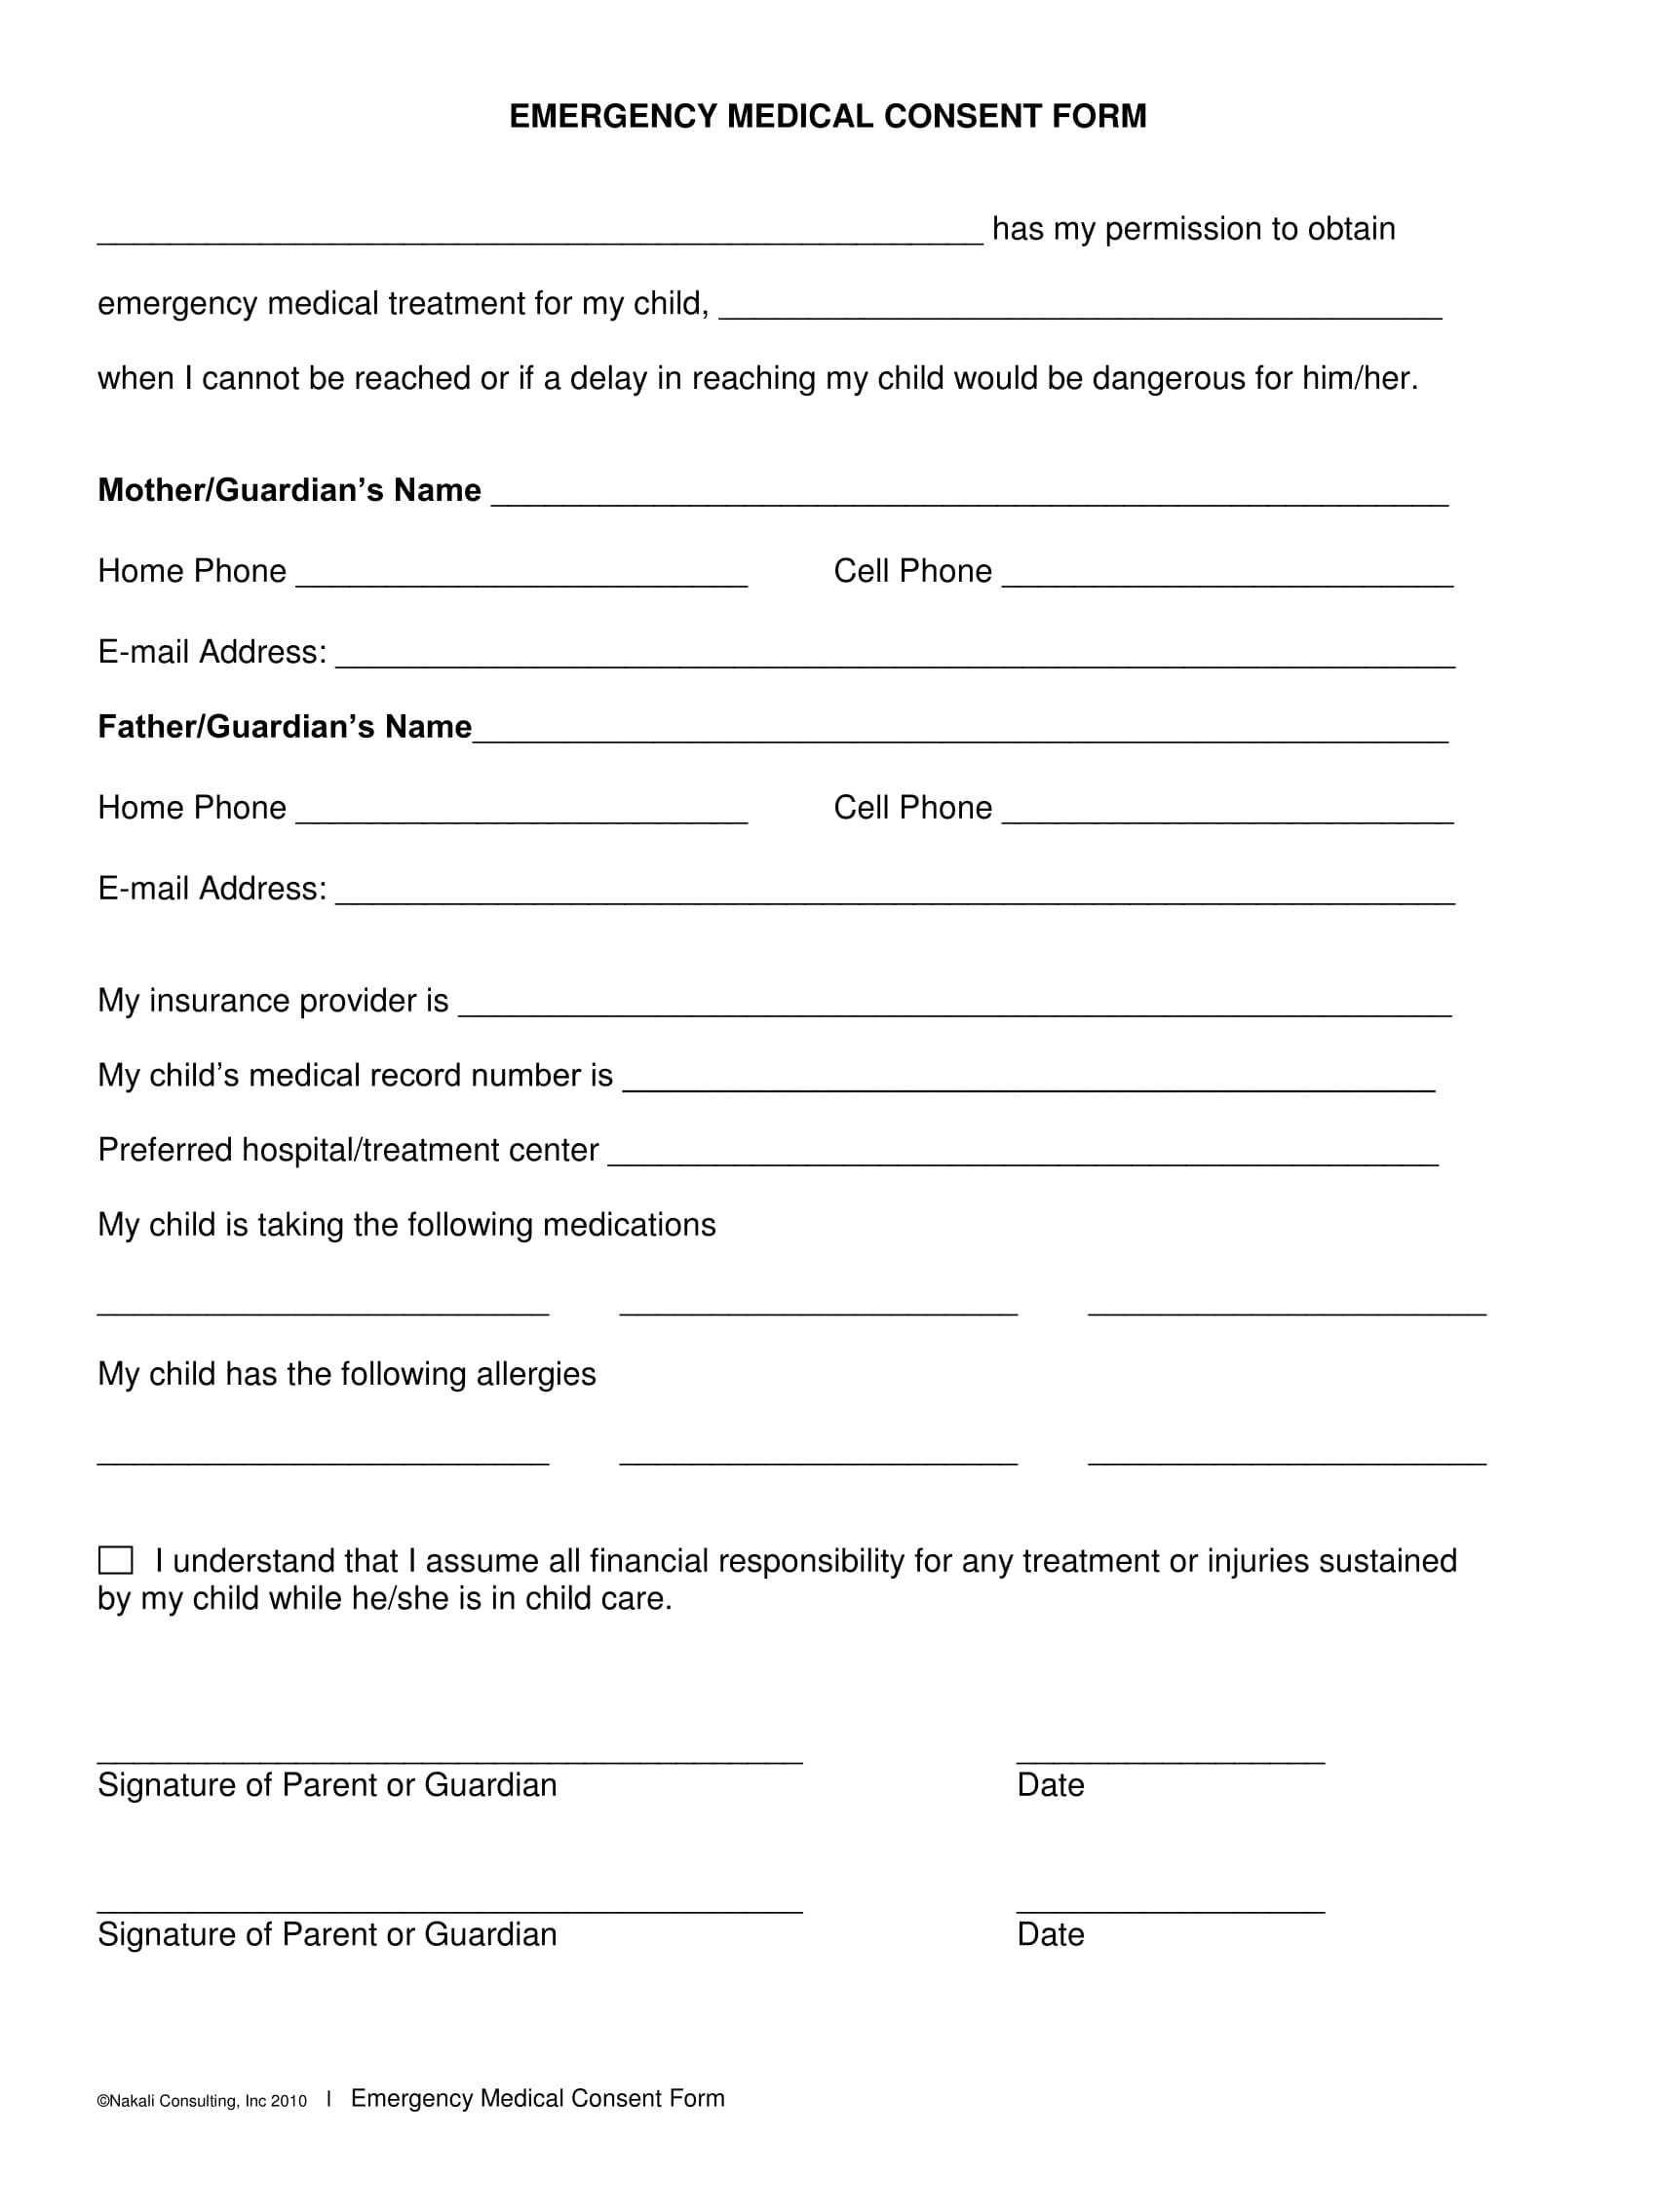 emergency medical consent form for child 1